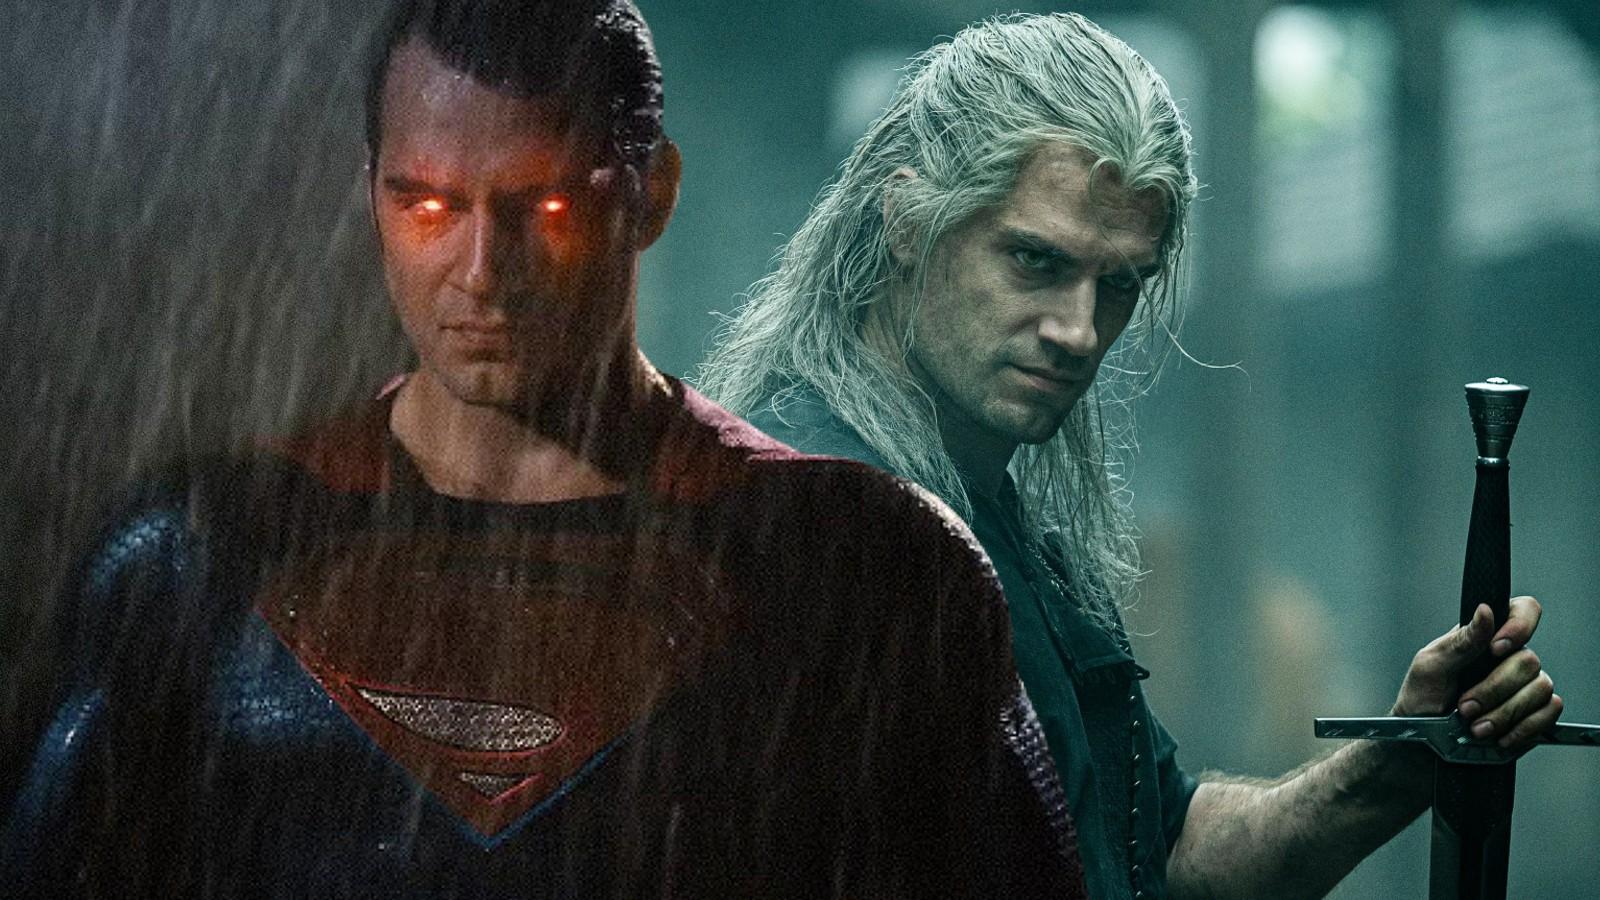 Marvel fans want Henry Cavill to play “MCU's Superman” - Dexerto